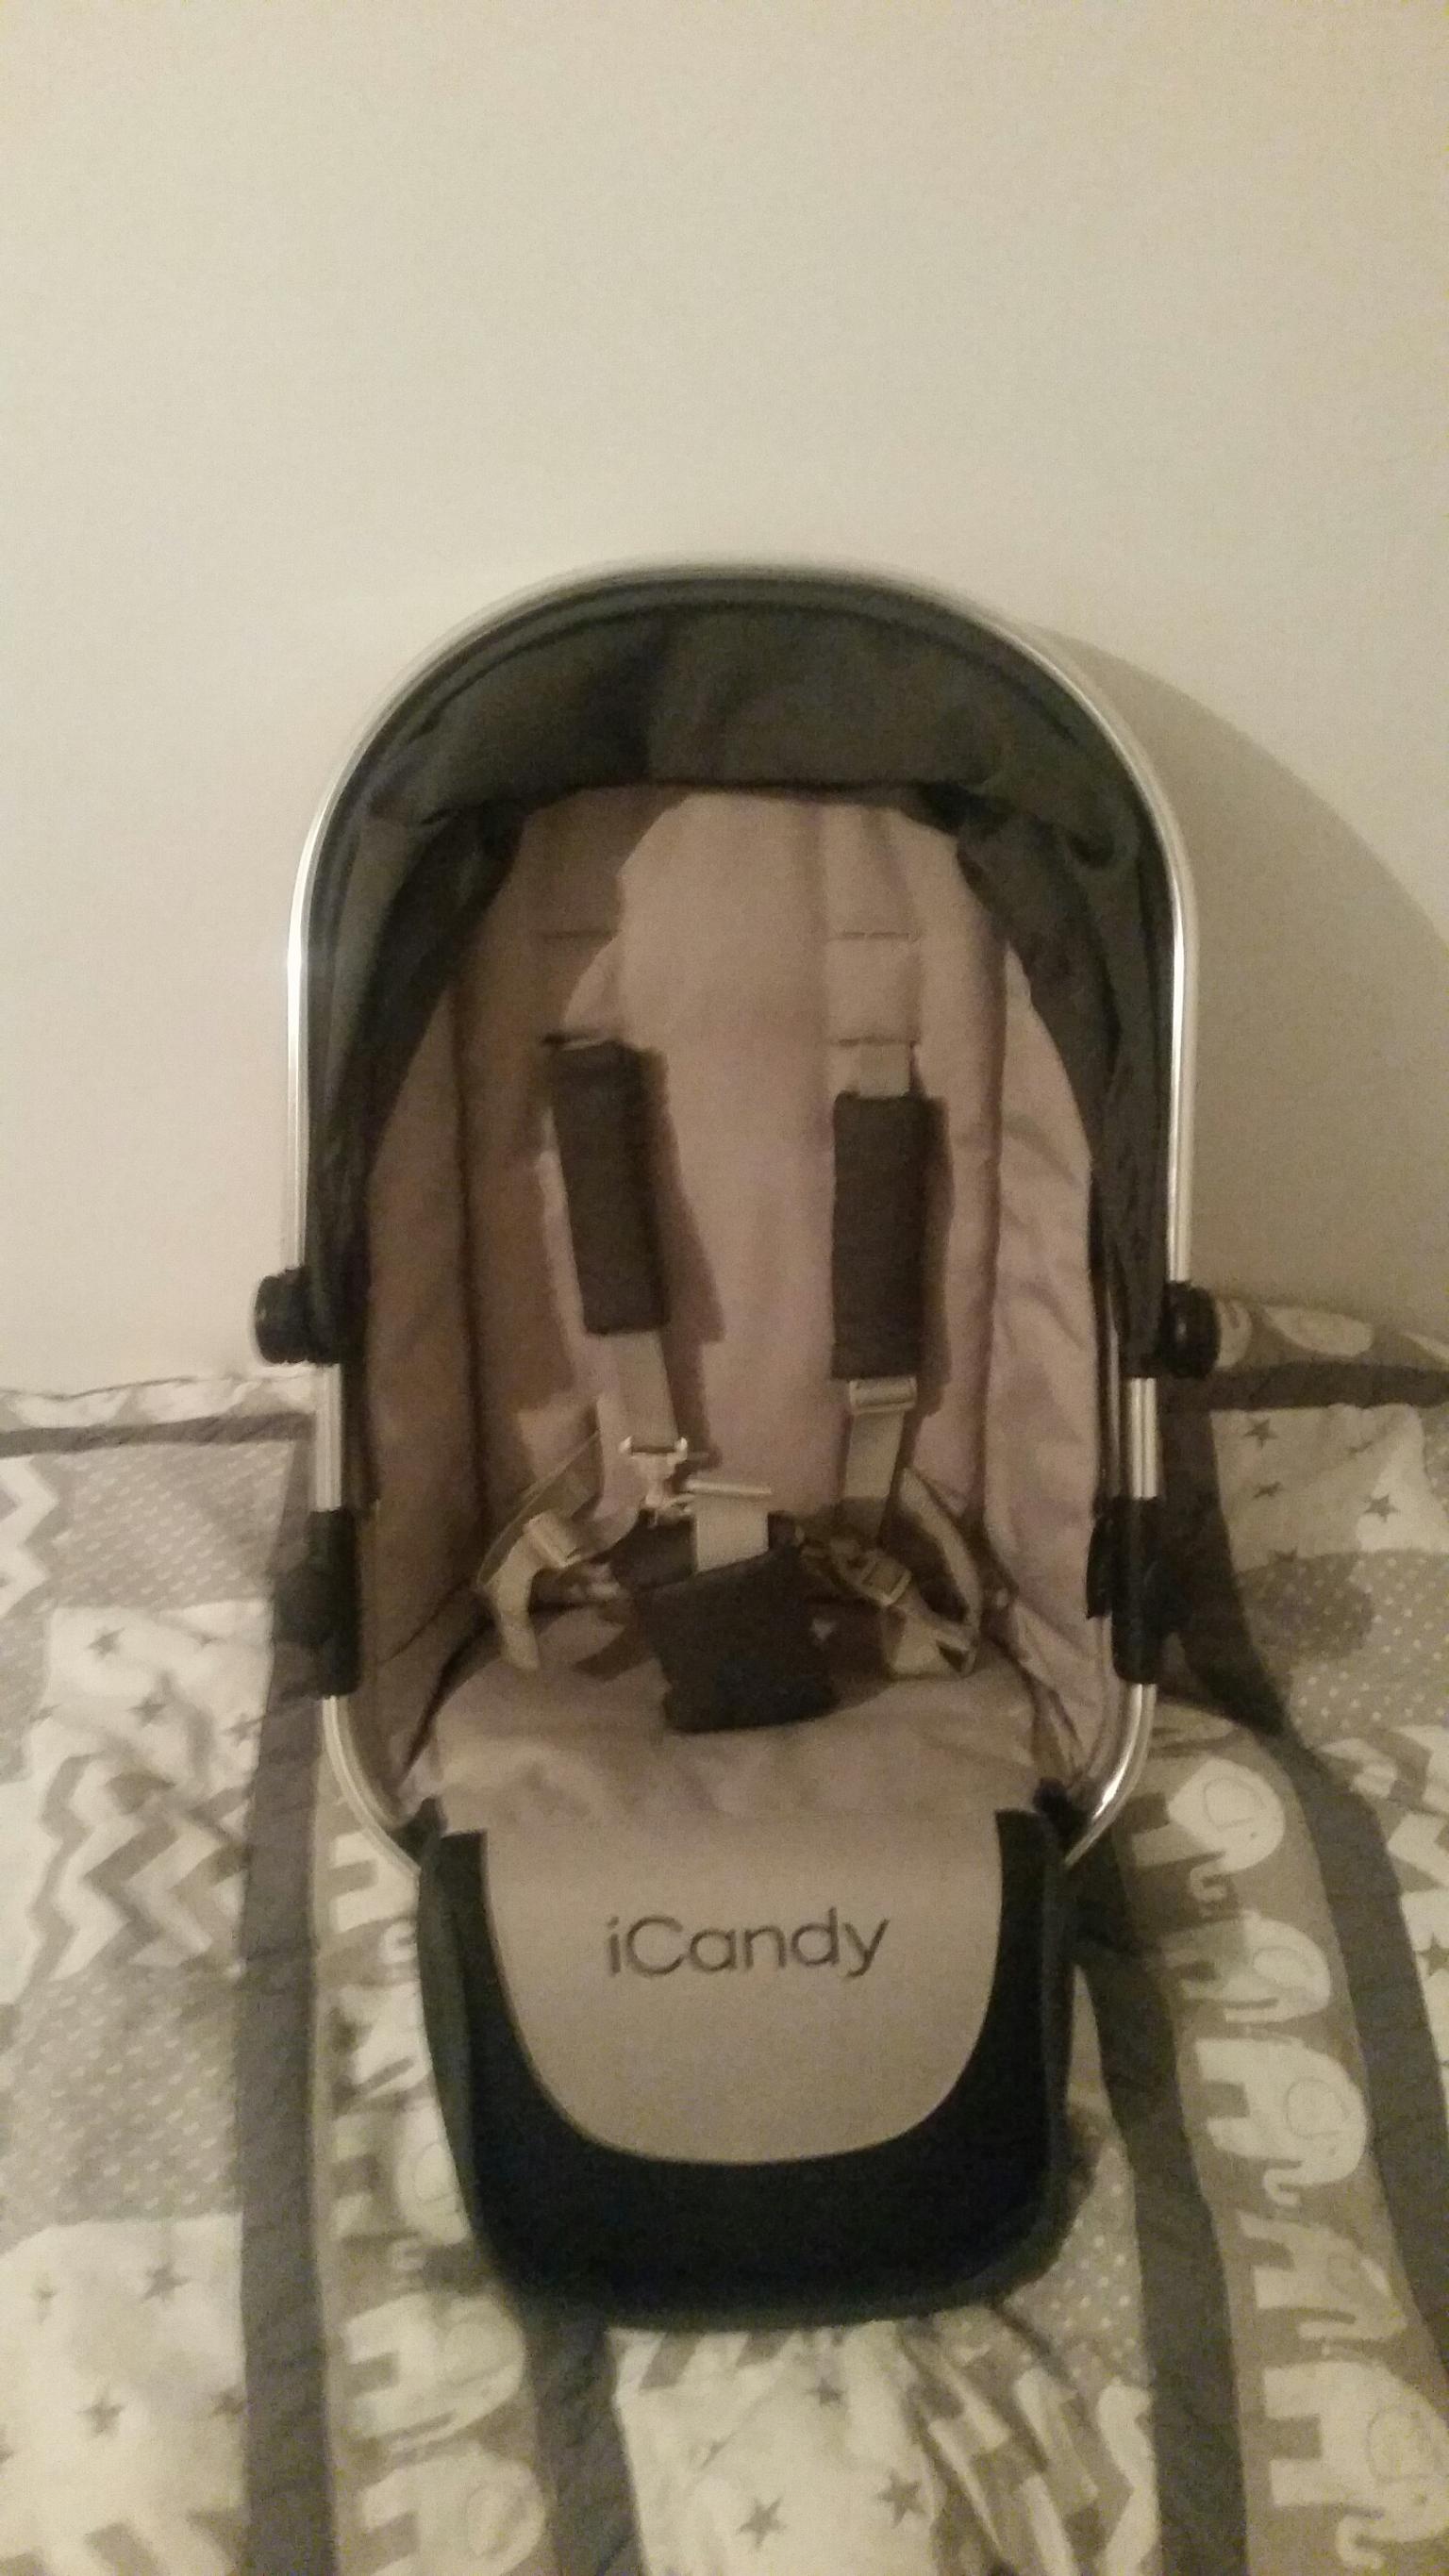 icandy peach lower seat